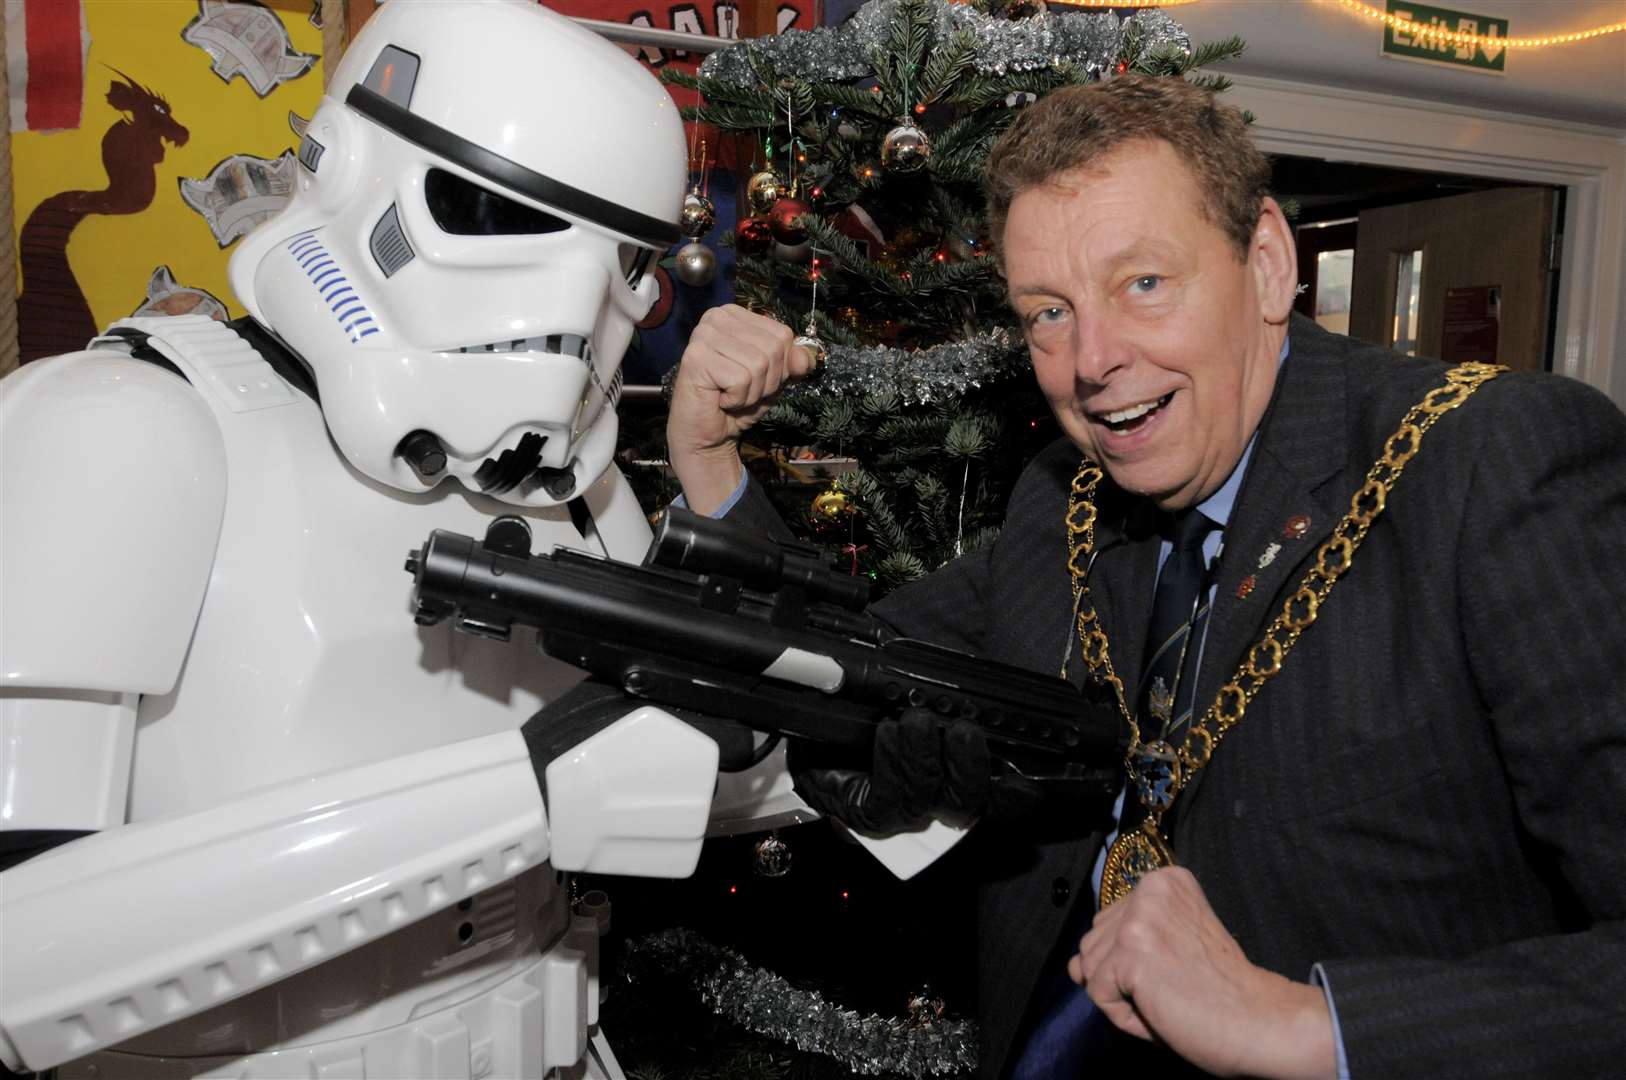 Swale mayor Adrian Crowther takes on an Imperial Stormtrooper during a Christmas fair at Canterbury Road Primary School, Sittingbourne, in 2009. Picture: Andy Payton